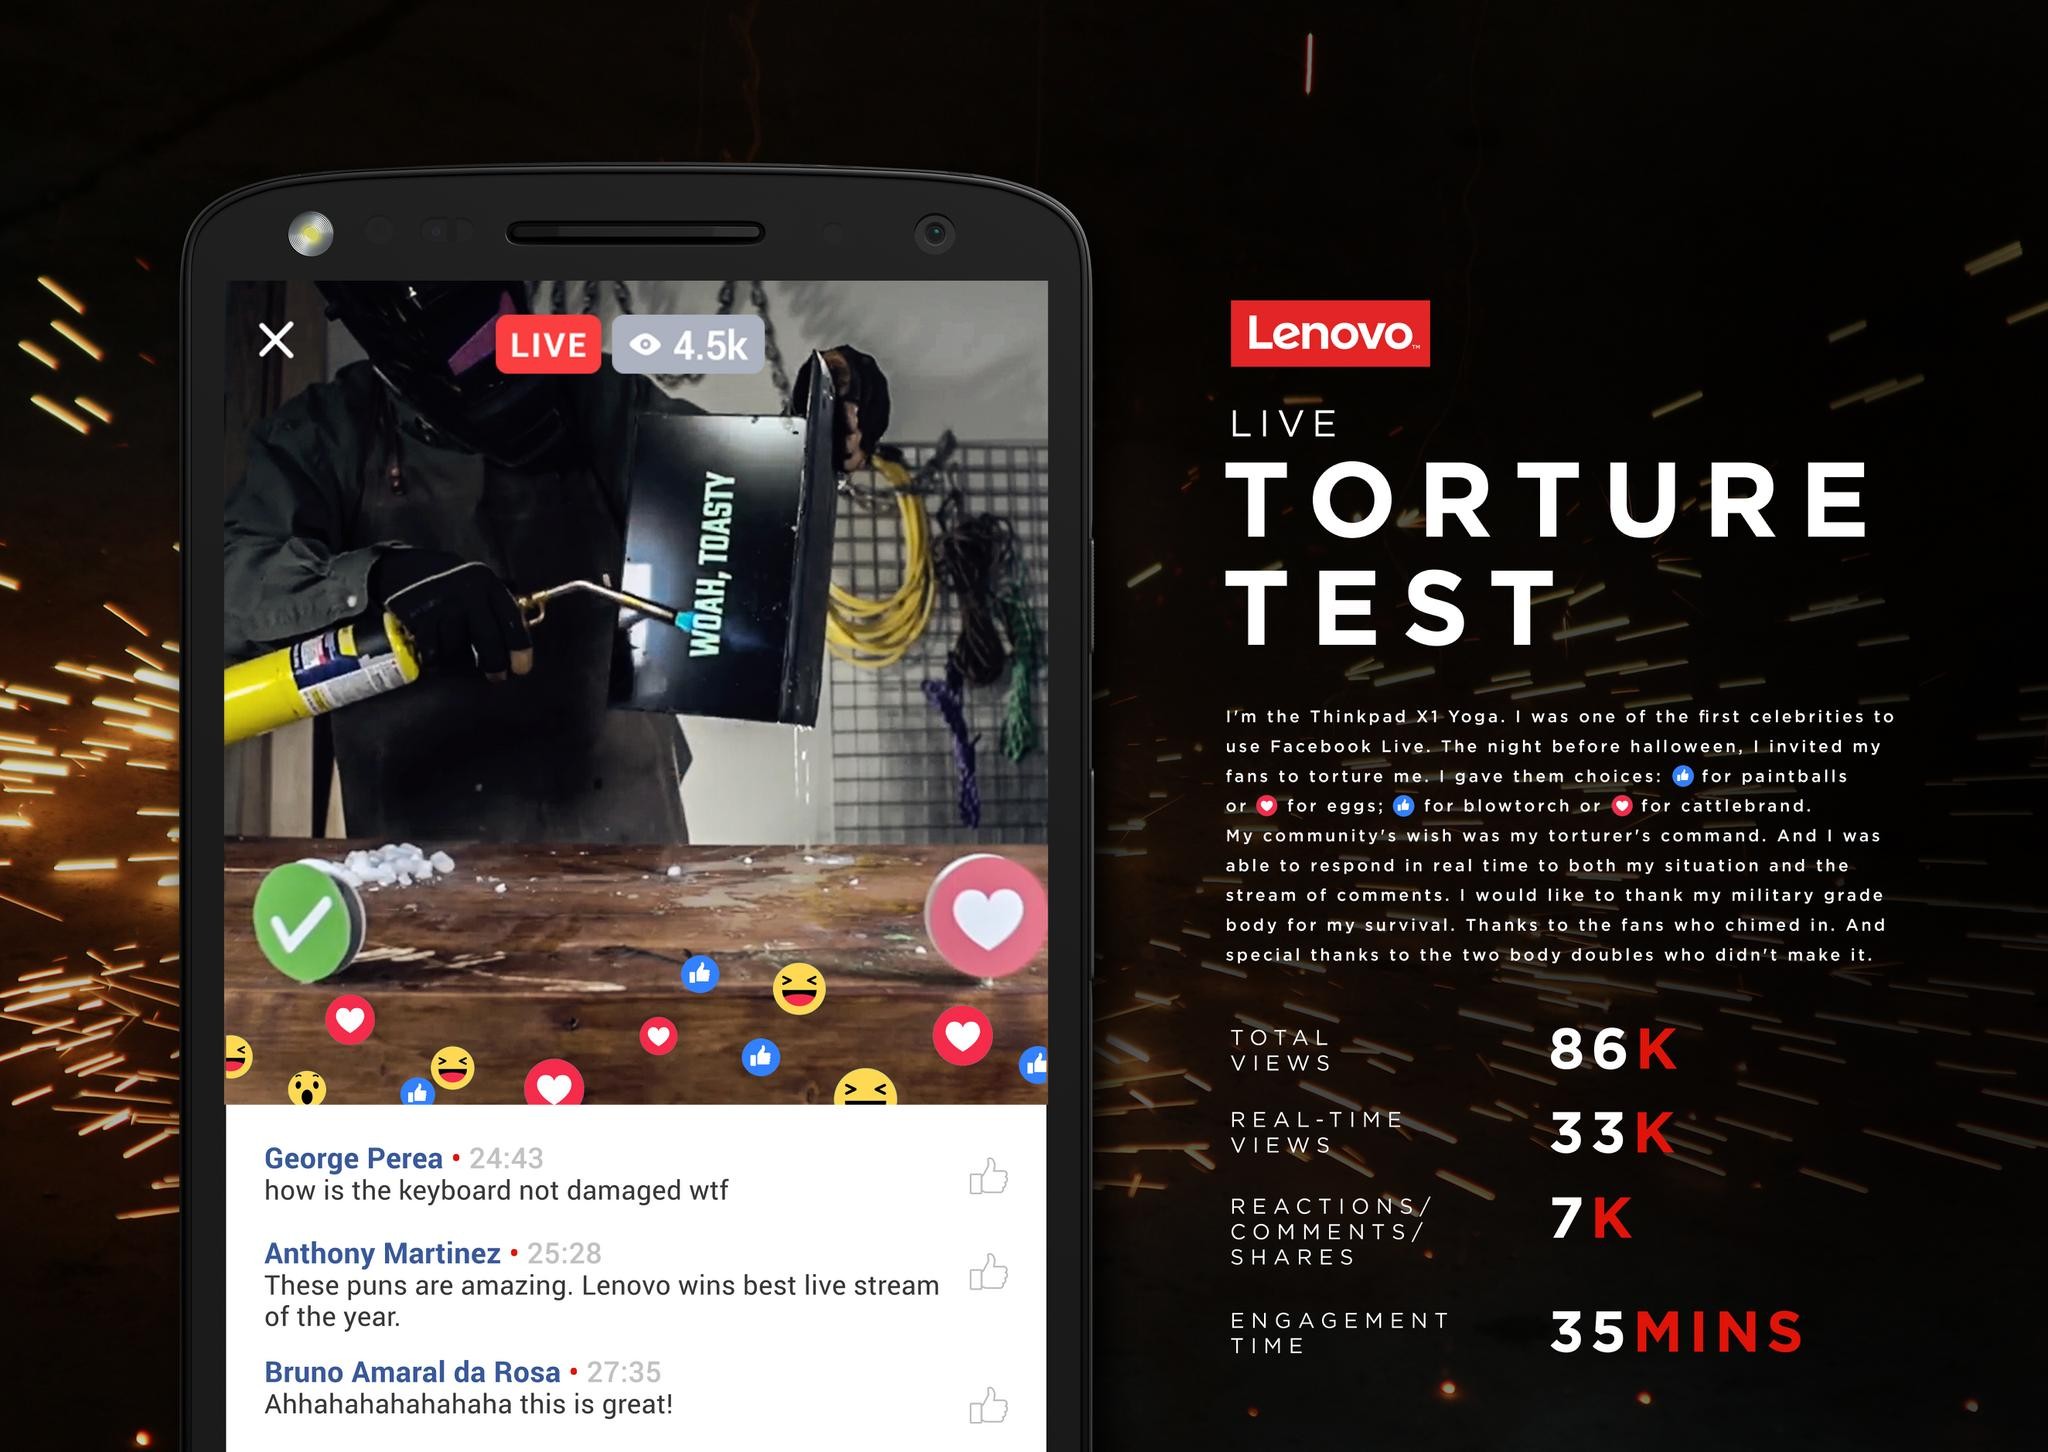 The Live Torture Test